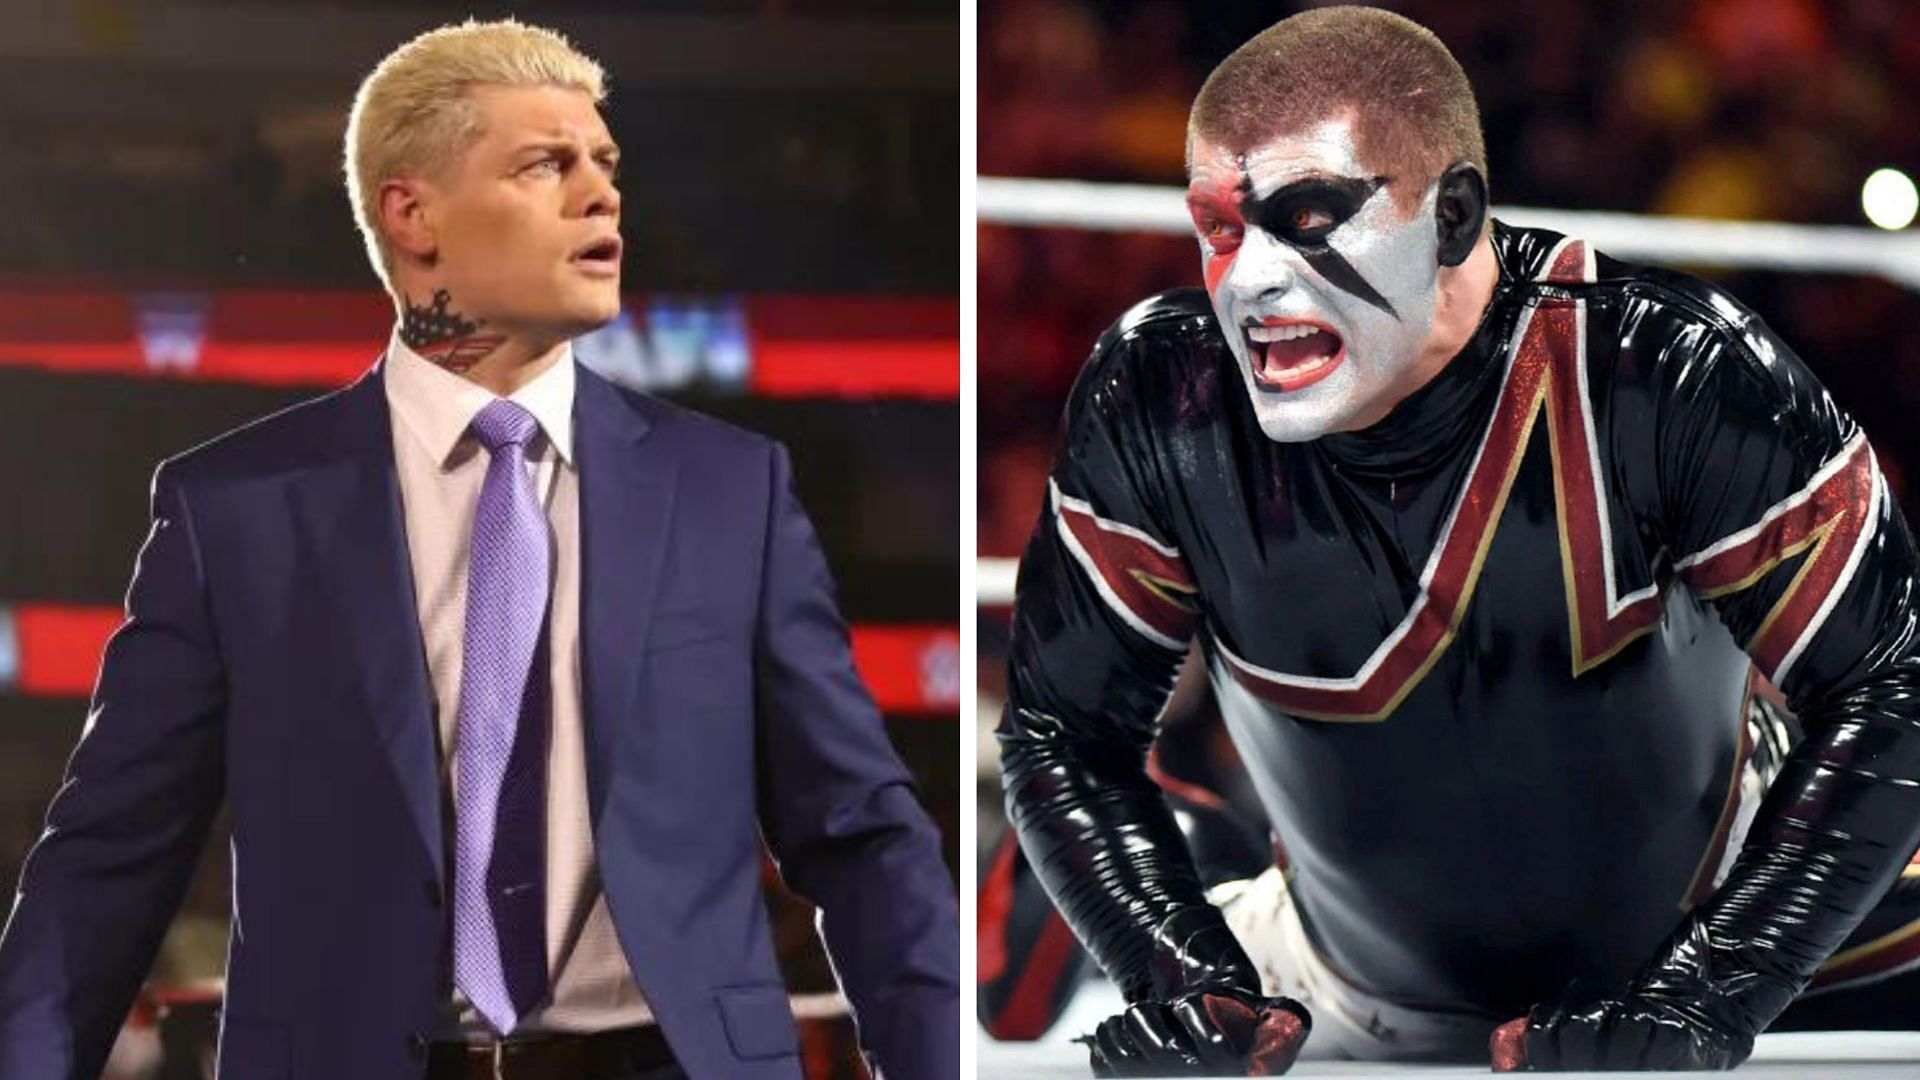 WWE Superstar Cody Rhodes used to portray Stardust in WWE